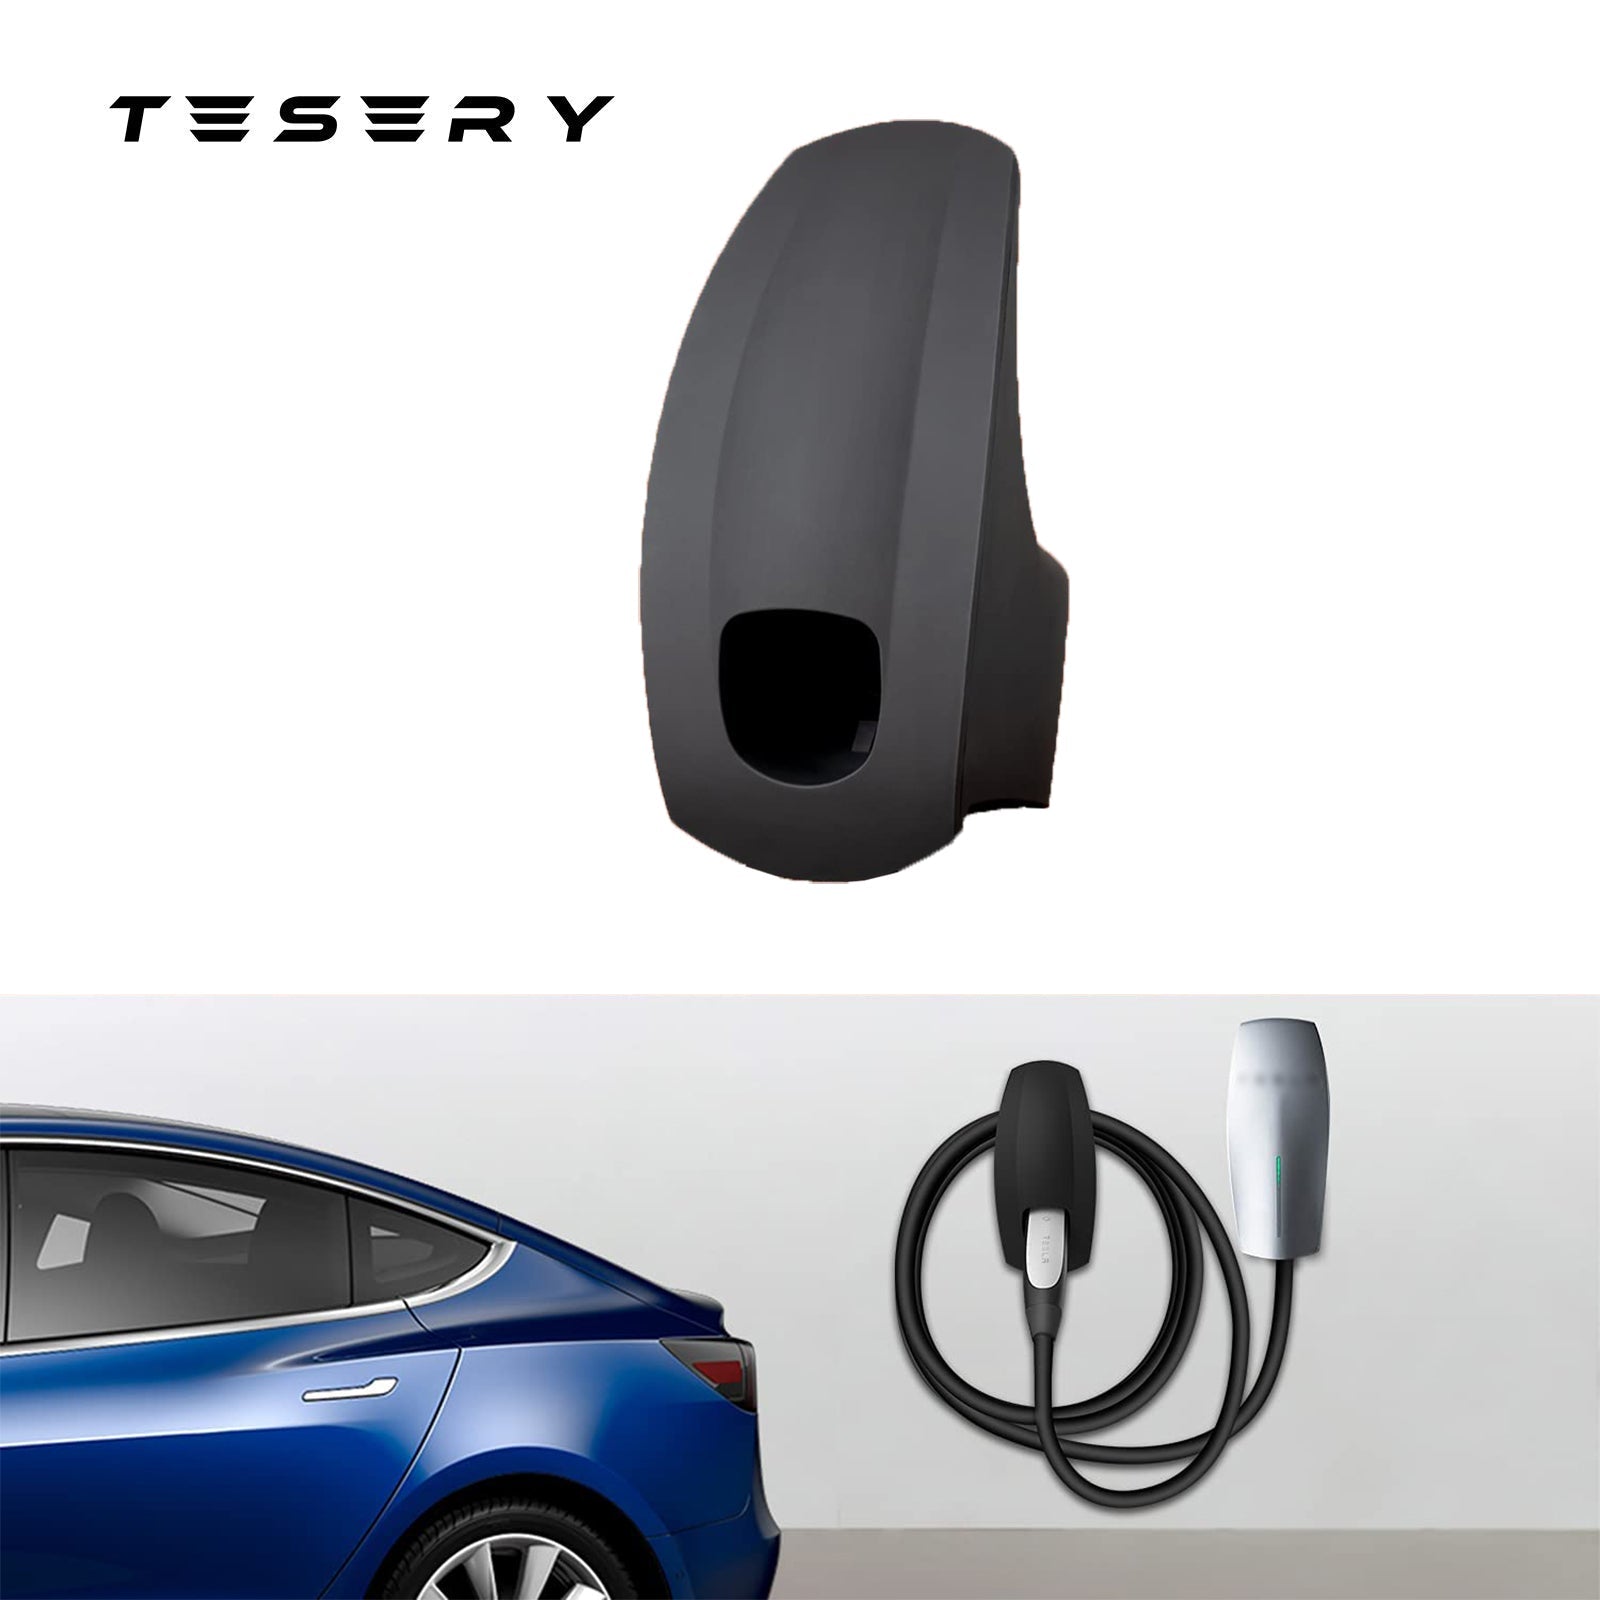 Wall Charging Cable Organizer Tesla Model S 3 X Y